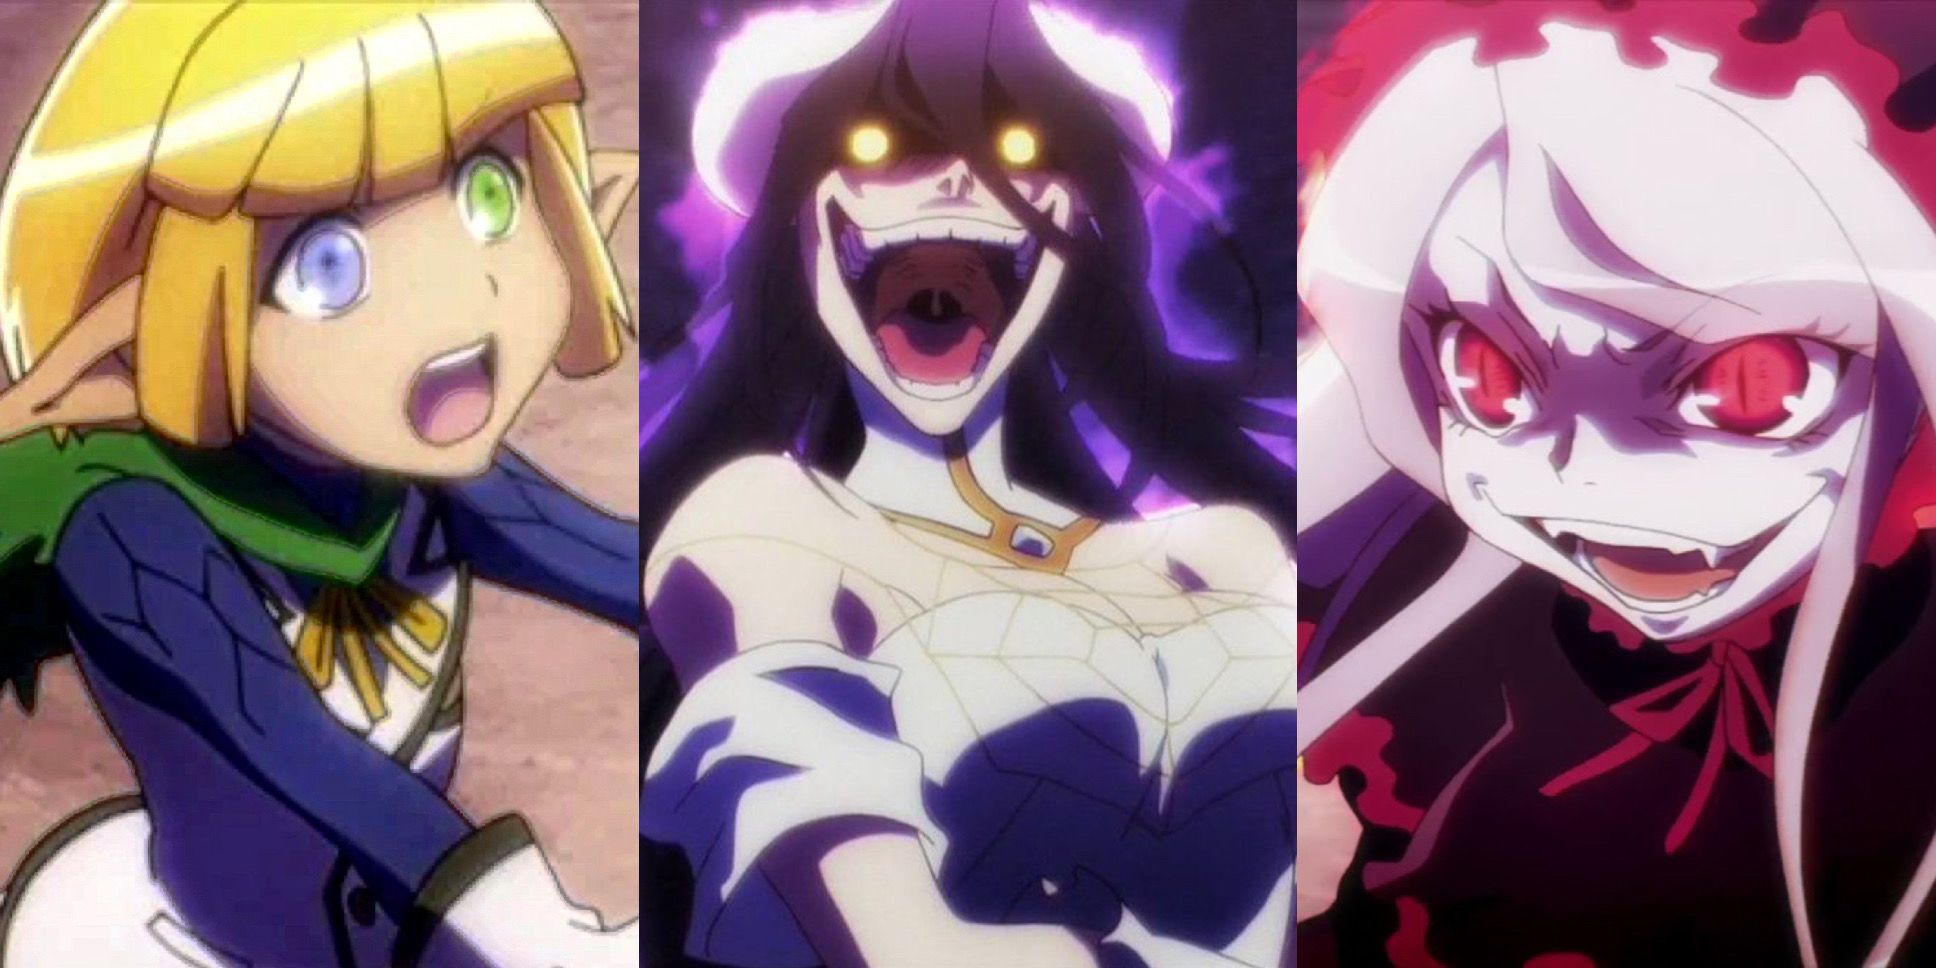 Ghoul and Guile: What Are Overlord's Female Characters Based On? – OTAQUEST